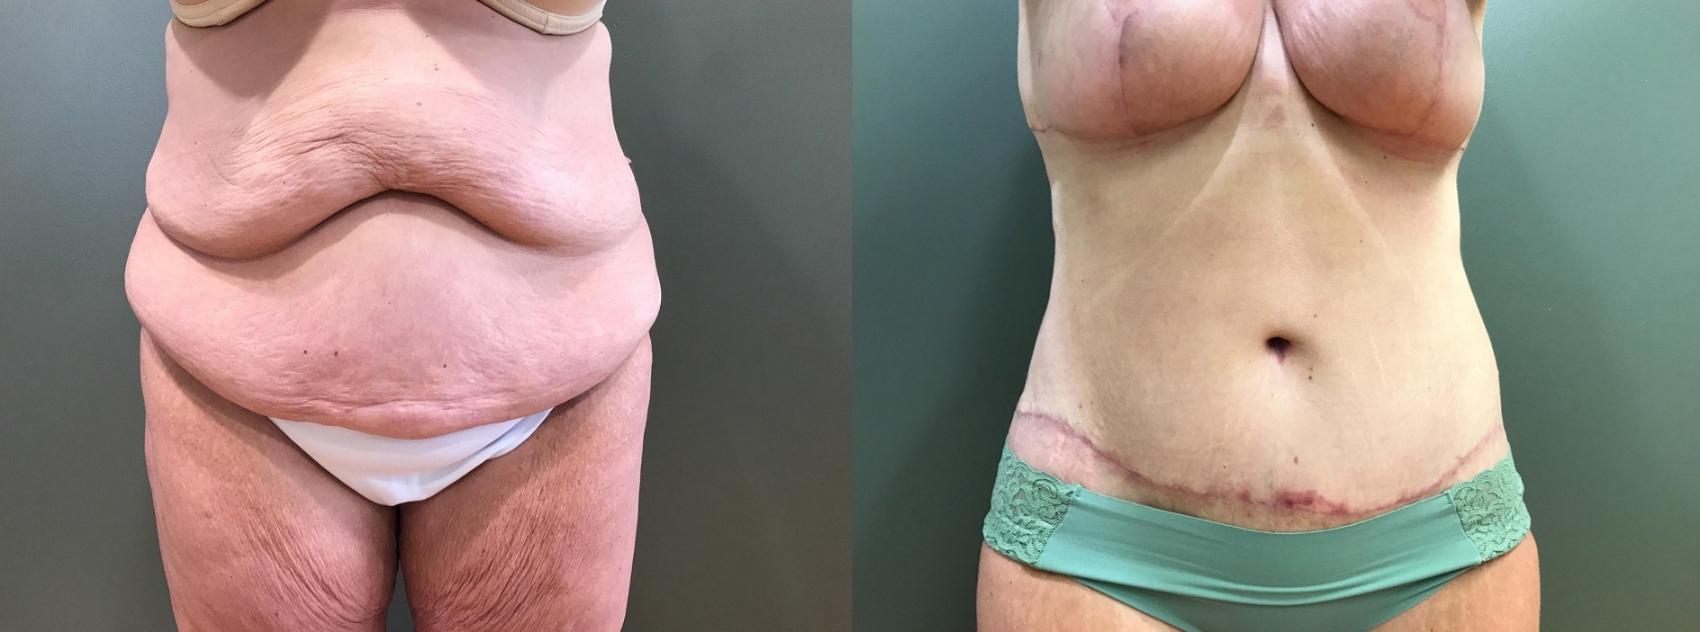 Before & After Body Contouring After Weight Loss Case 397 Front View in Ann Arbor, MI